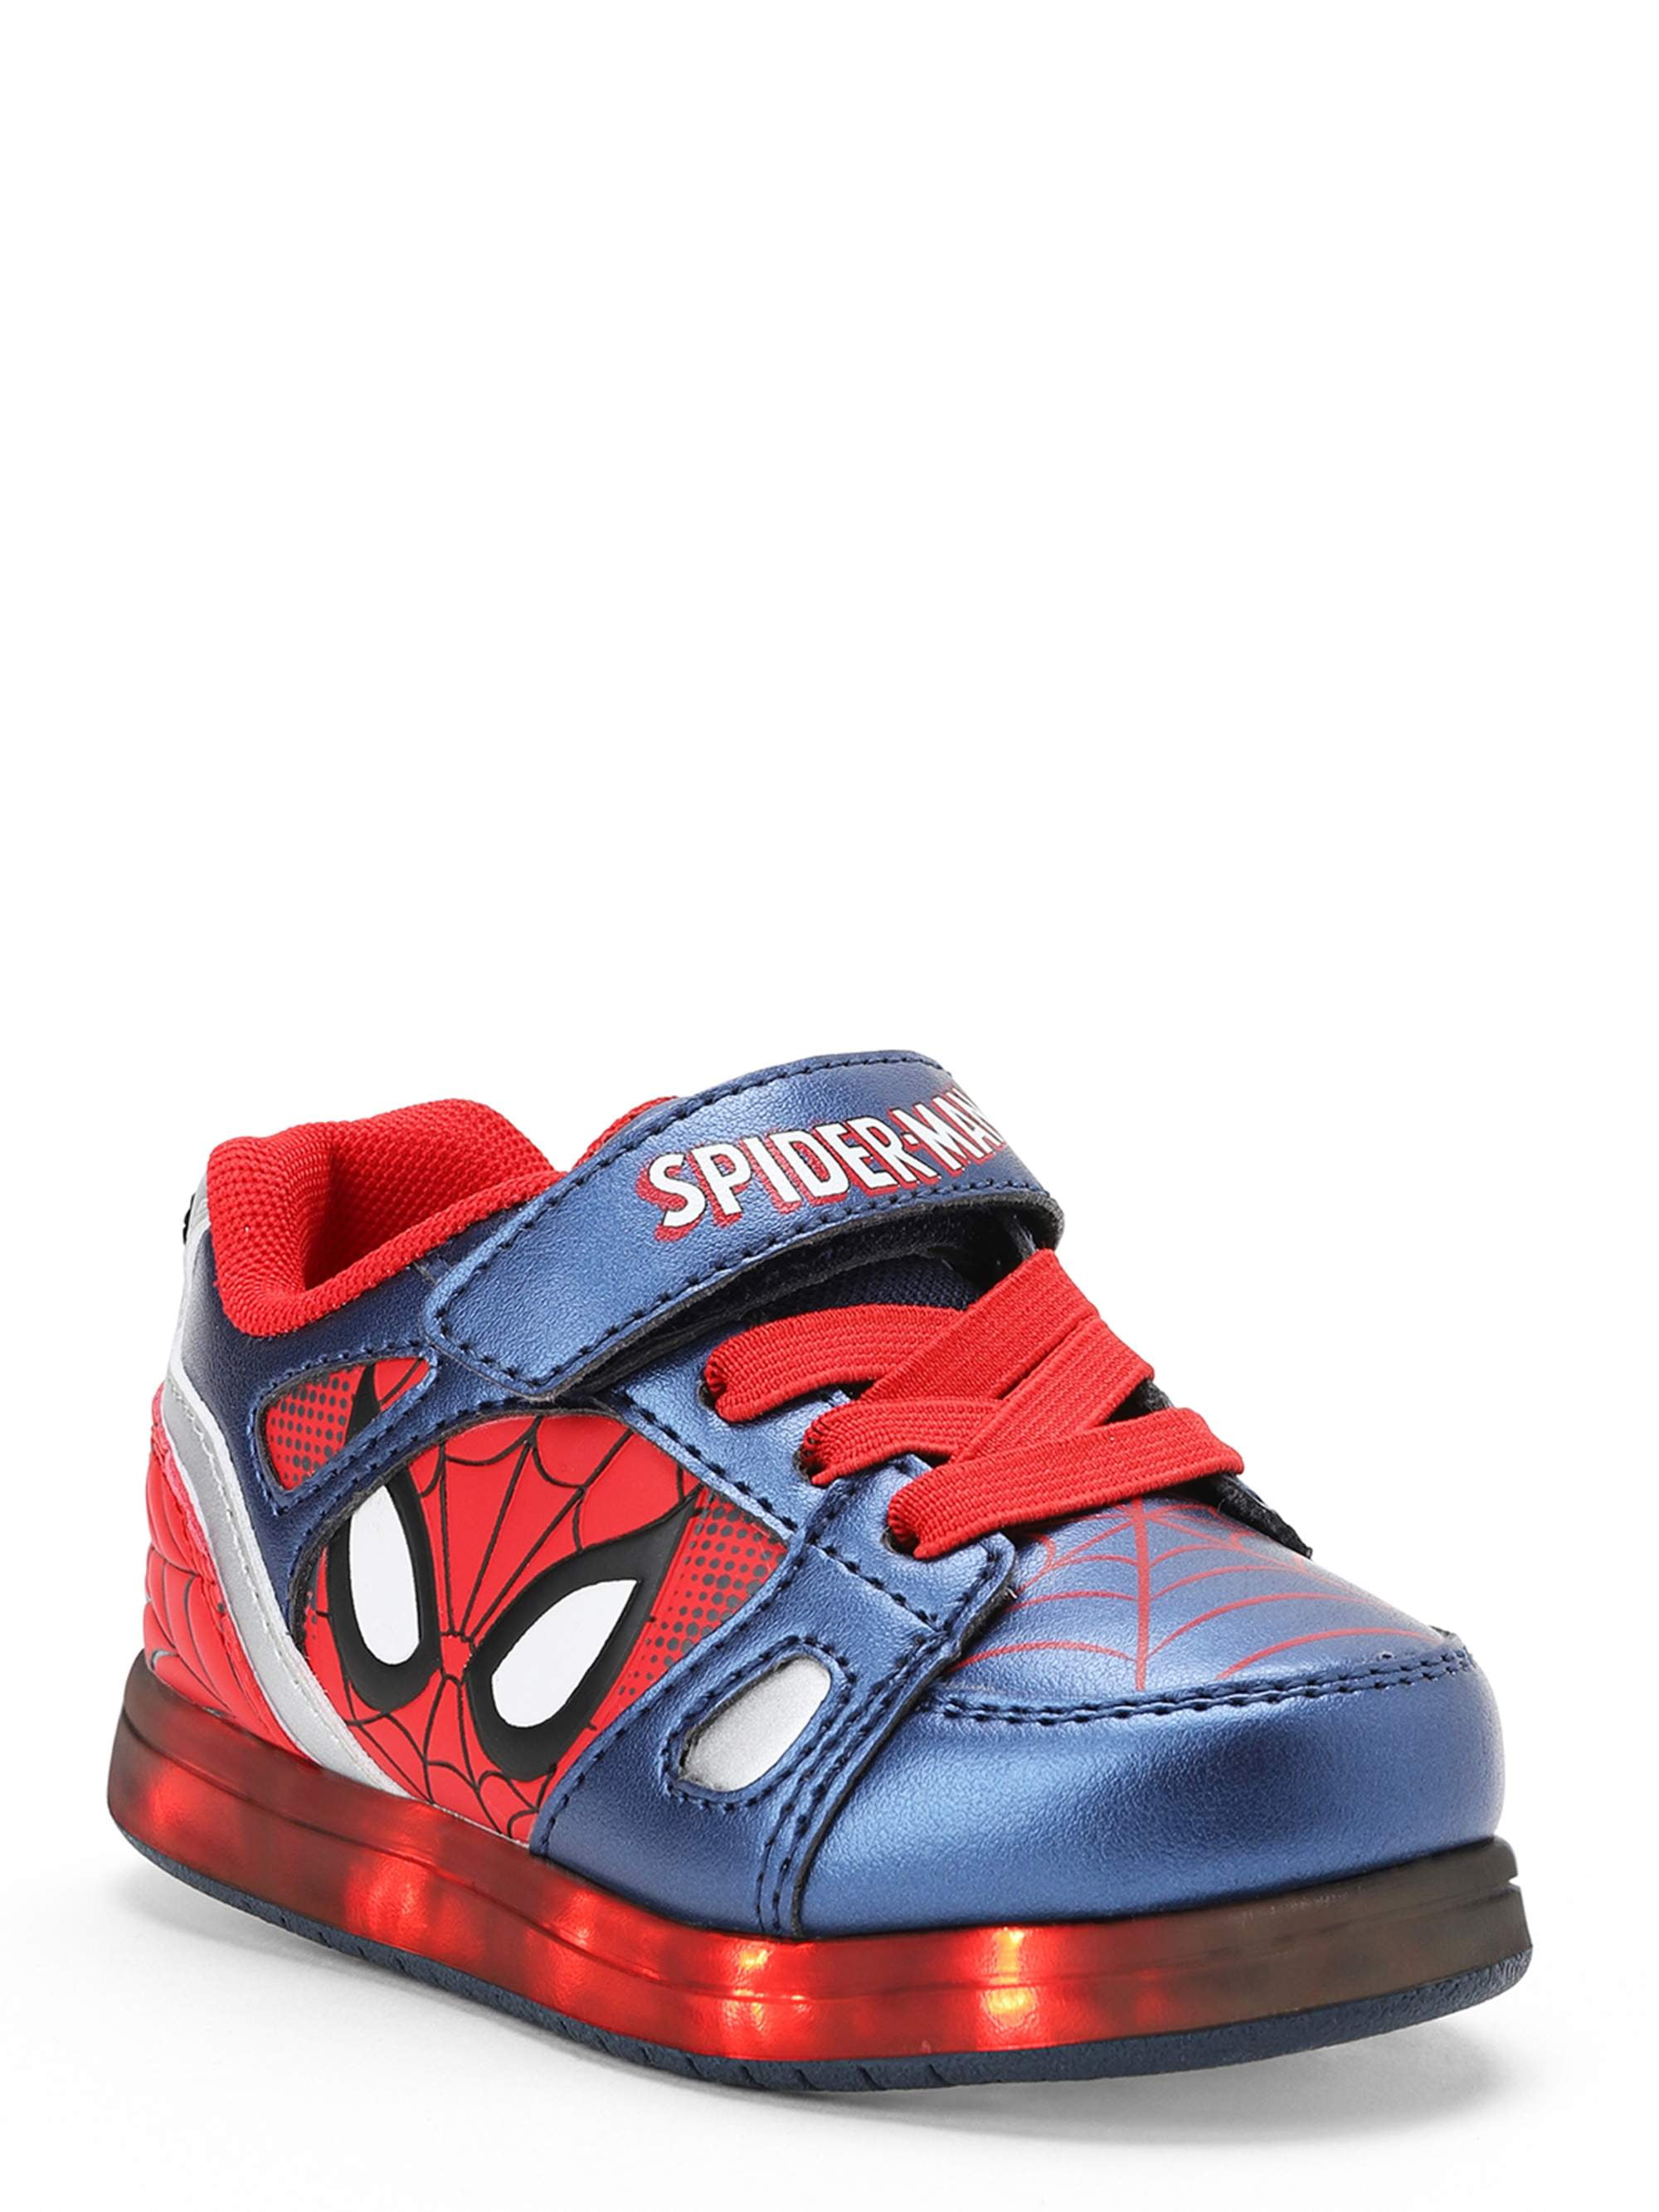 Spiderman Light Up Casual Sneaker 